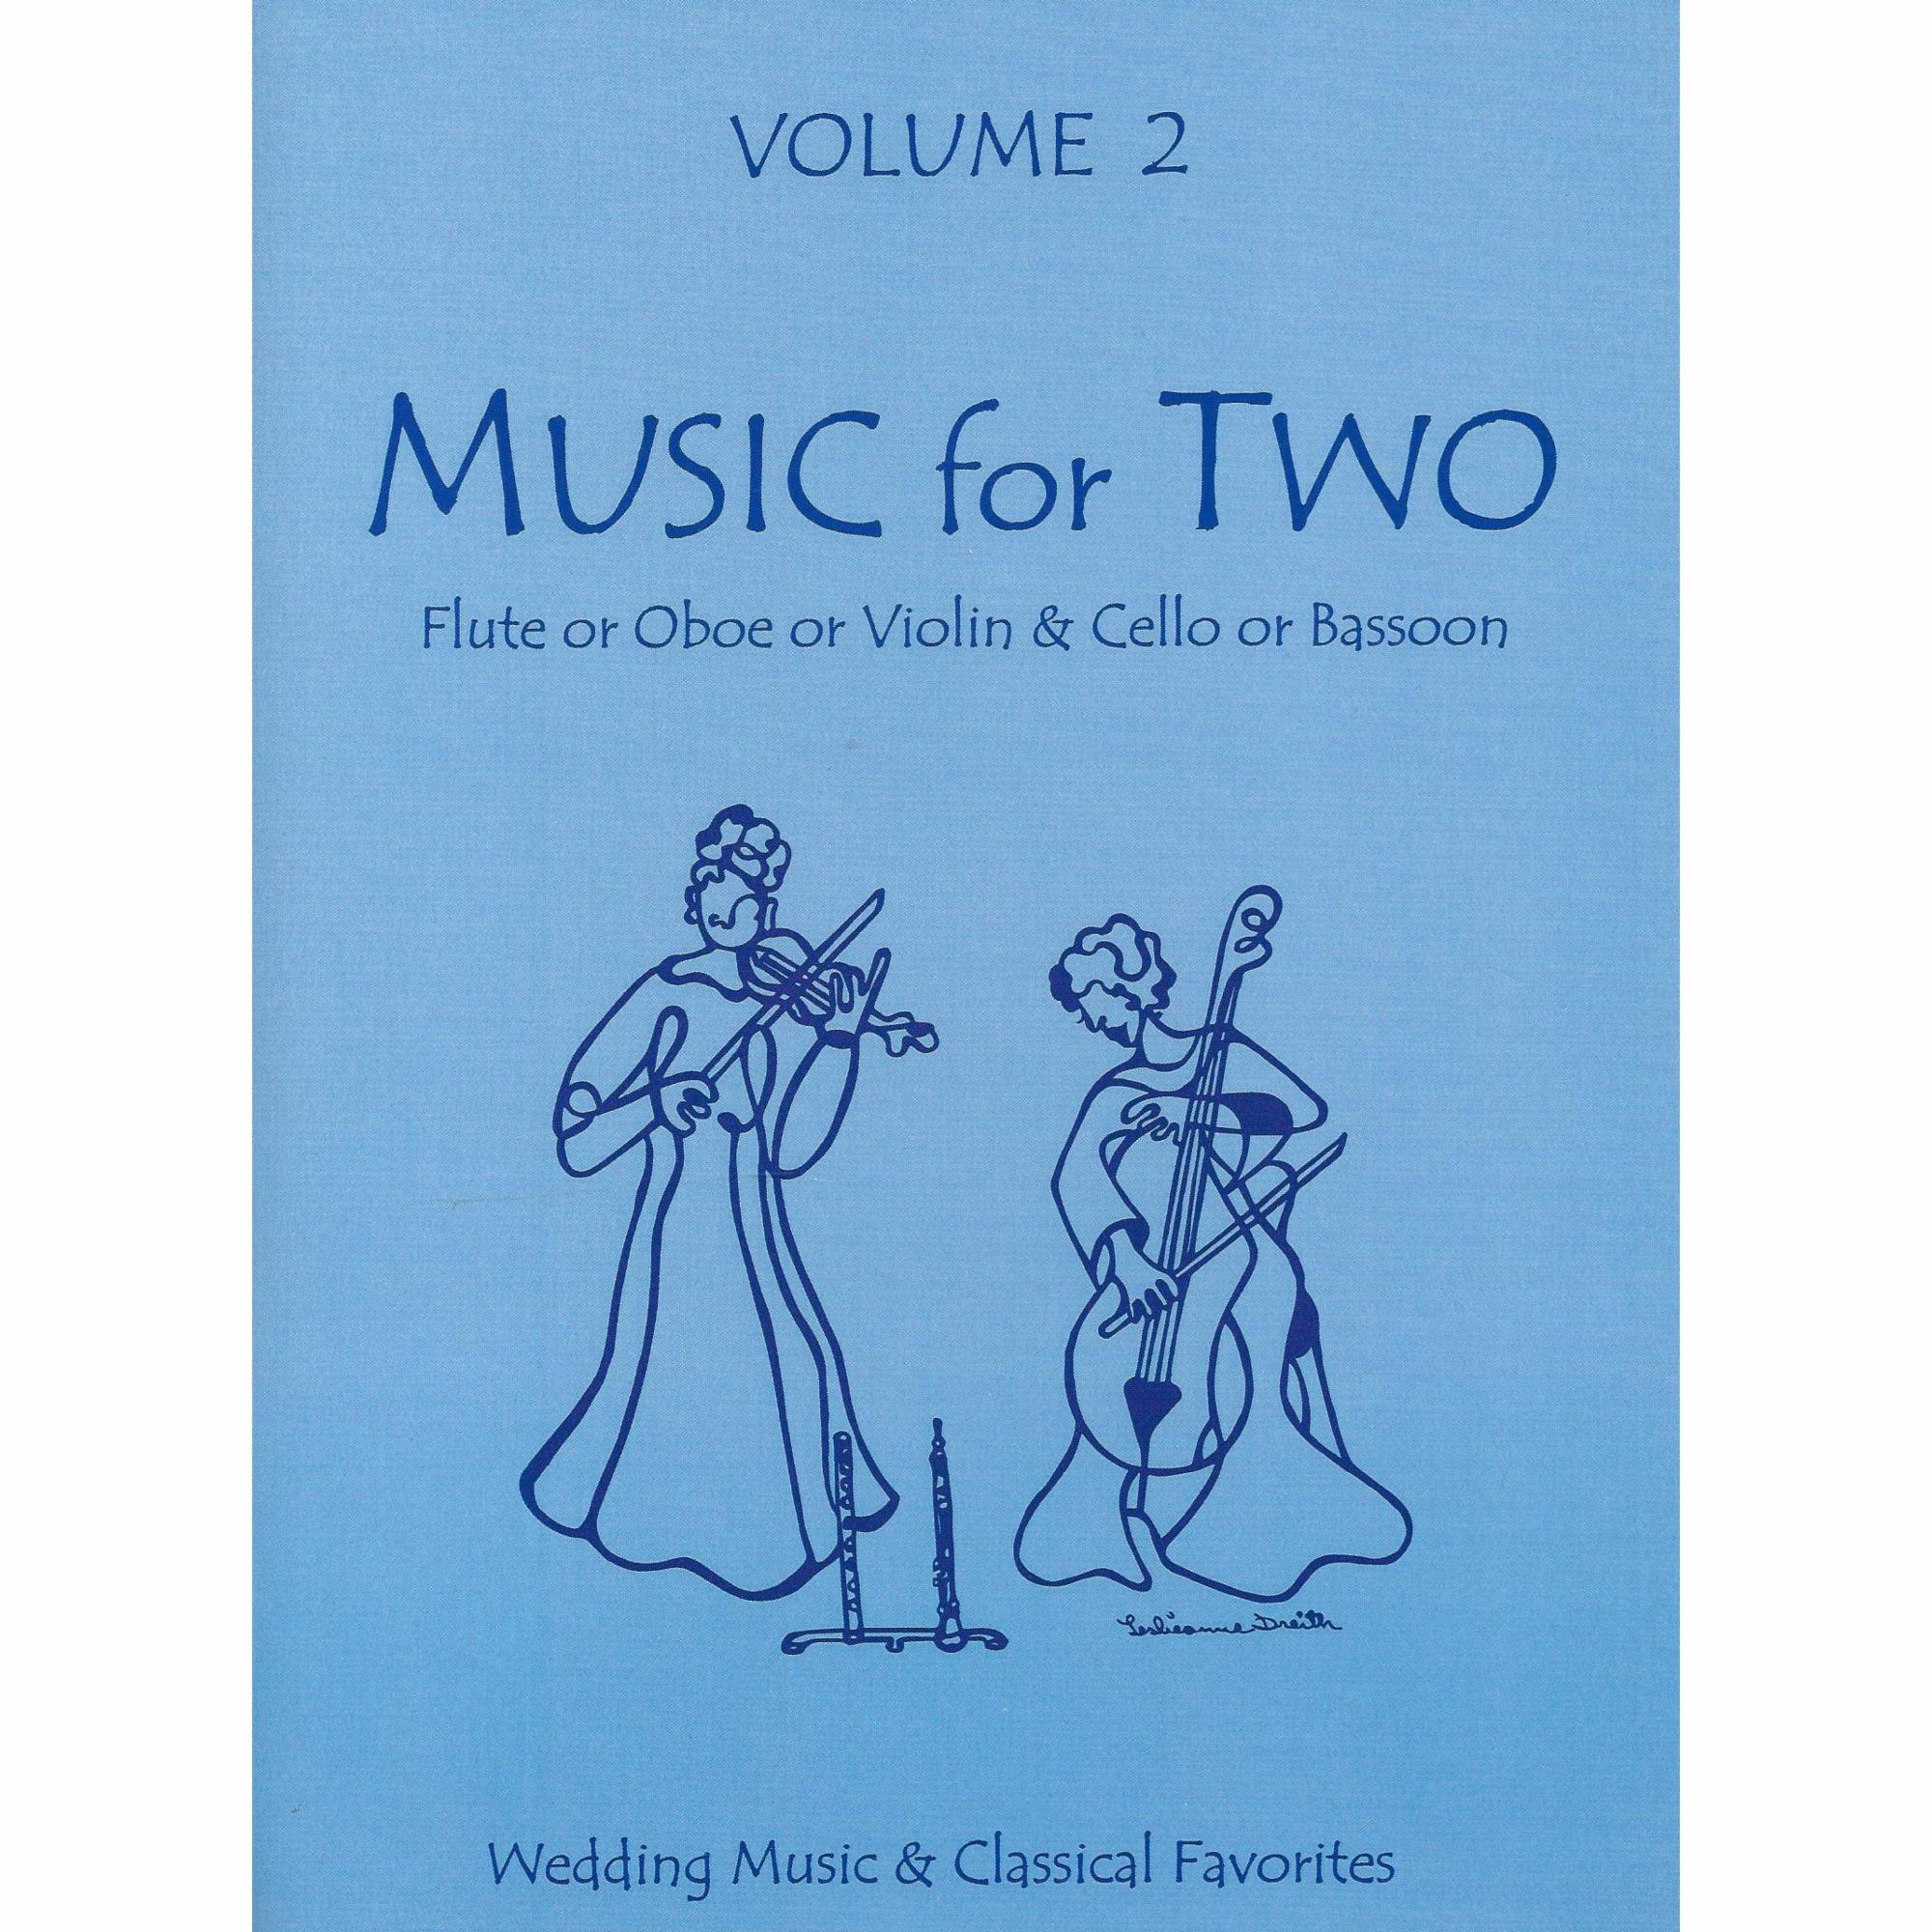 Music for Two, Vol. 2: Wedding Music and Classical Favorites